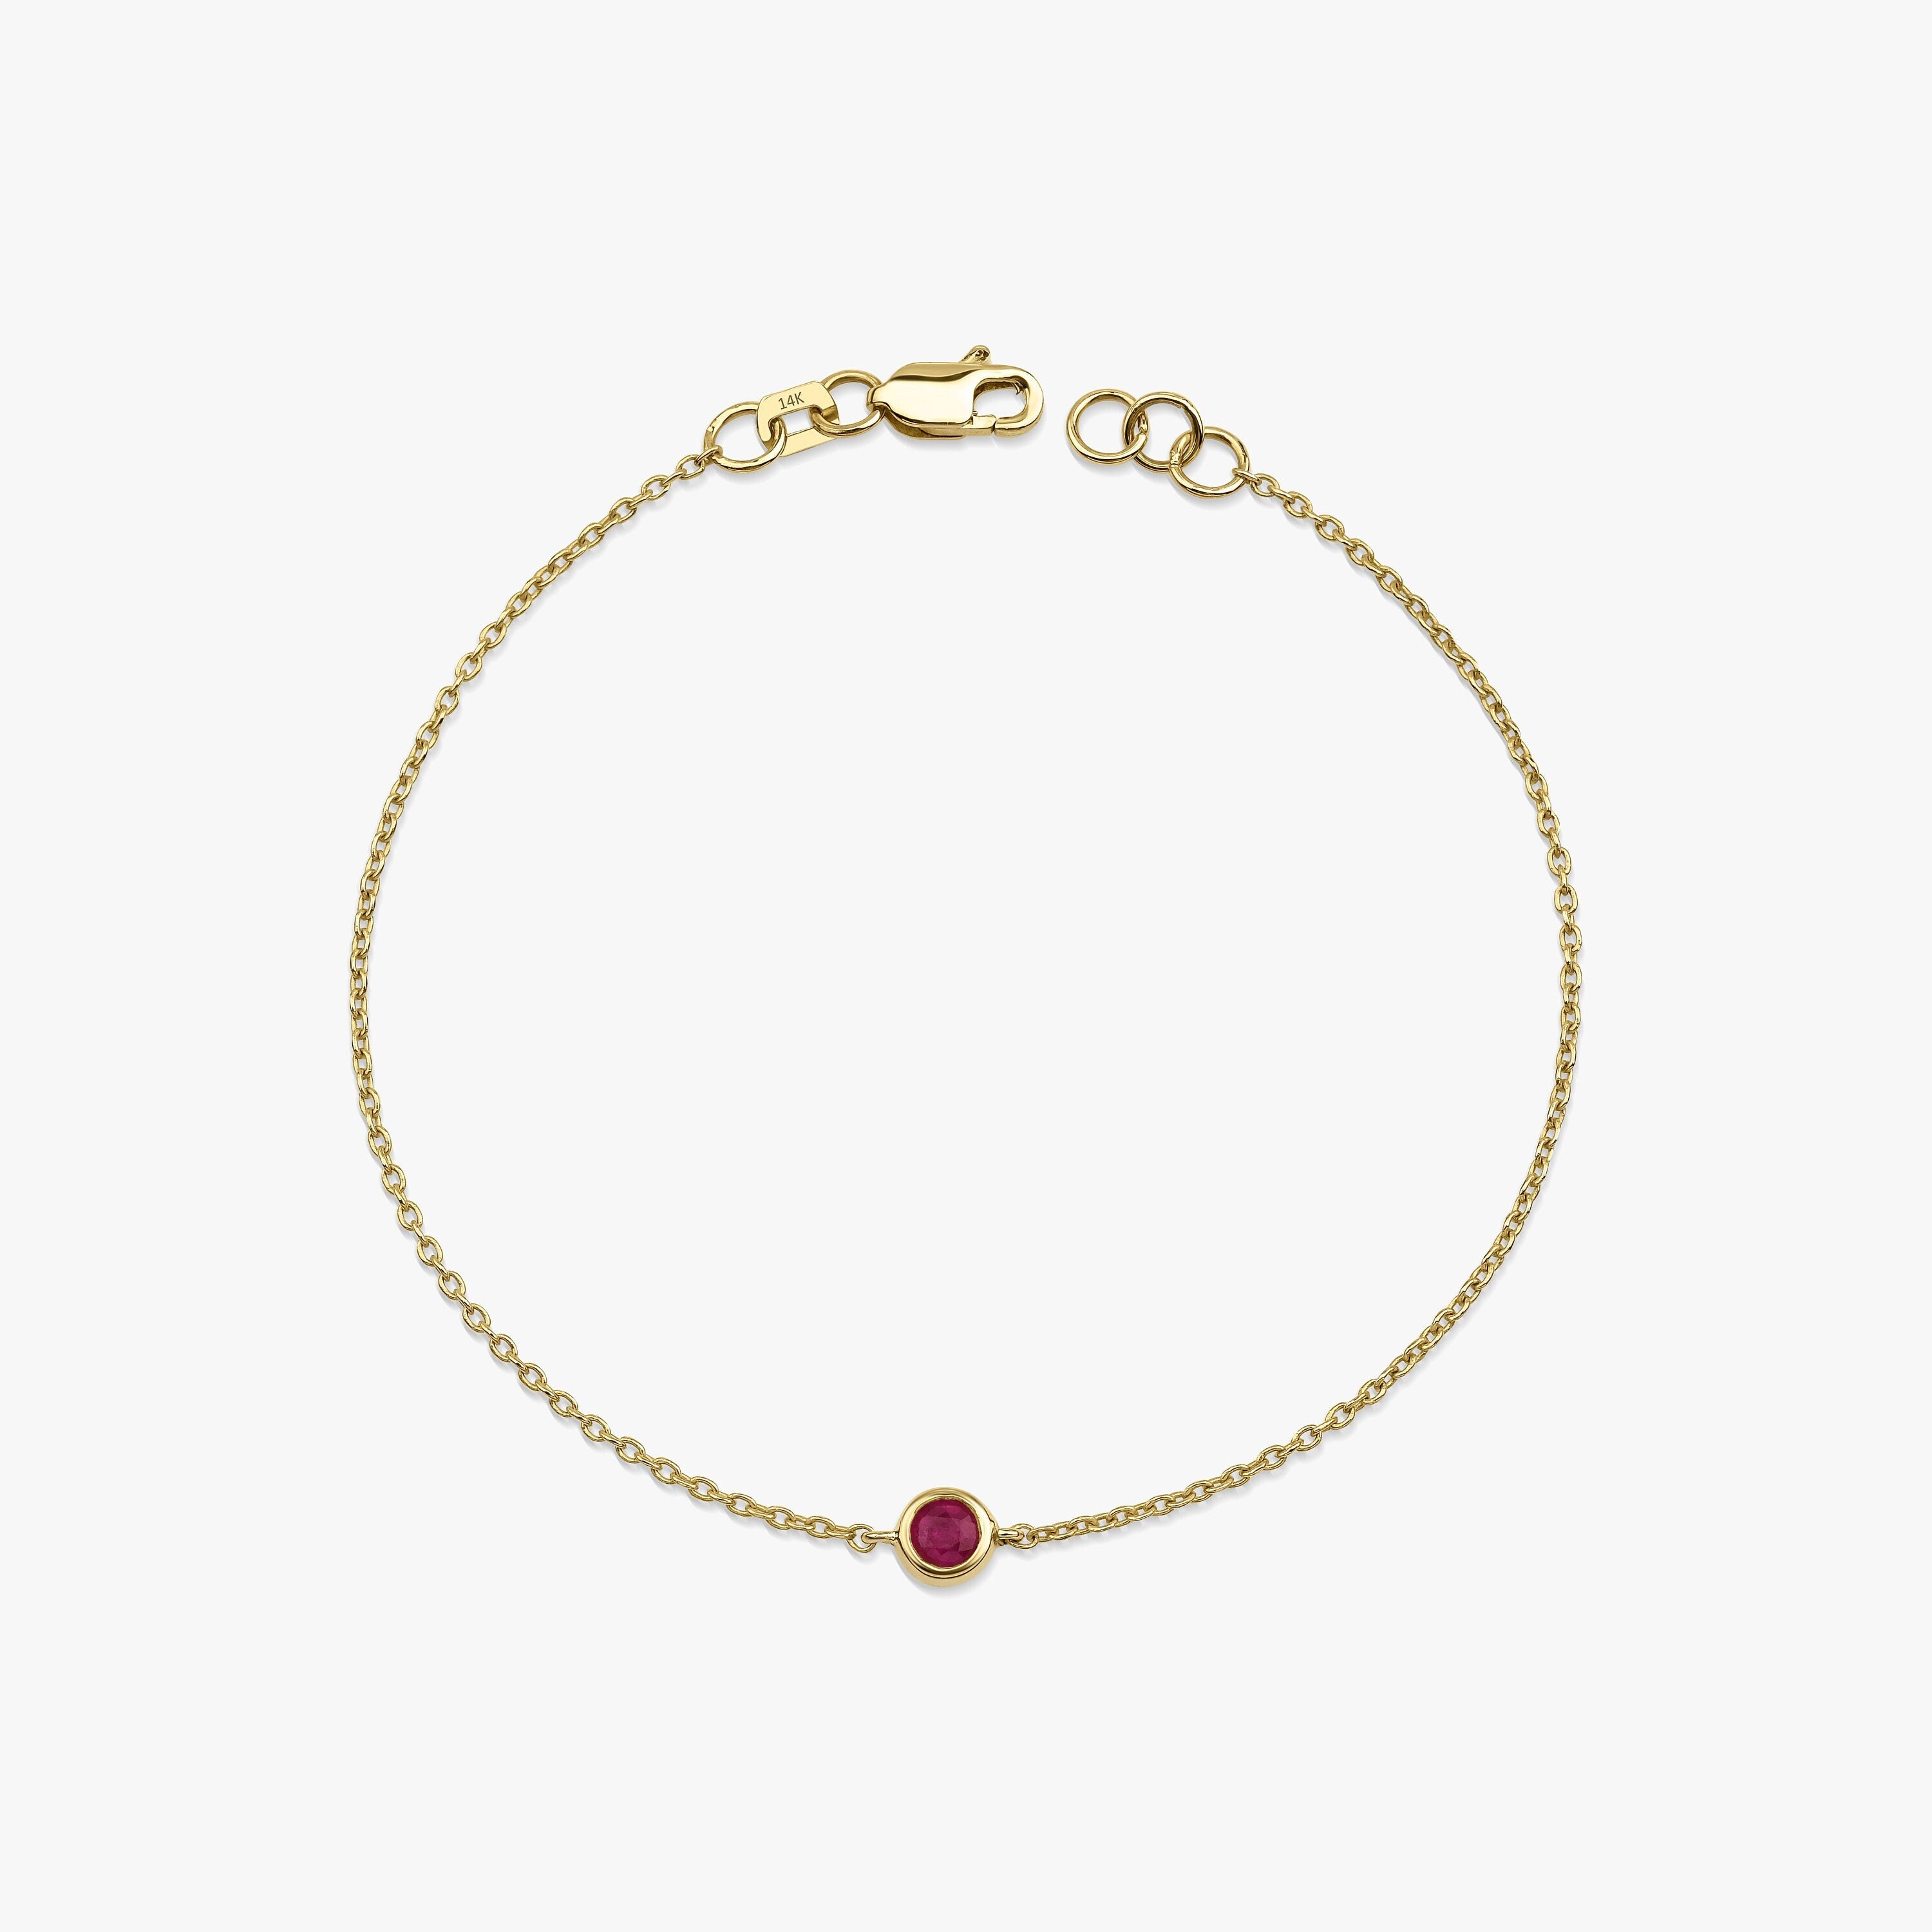 Natural Ruby Bracelet Available in 14K and 18K Gold